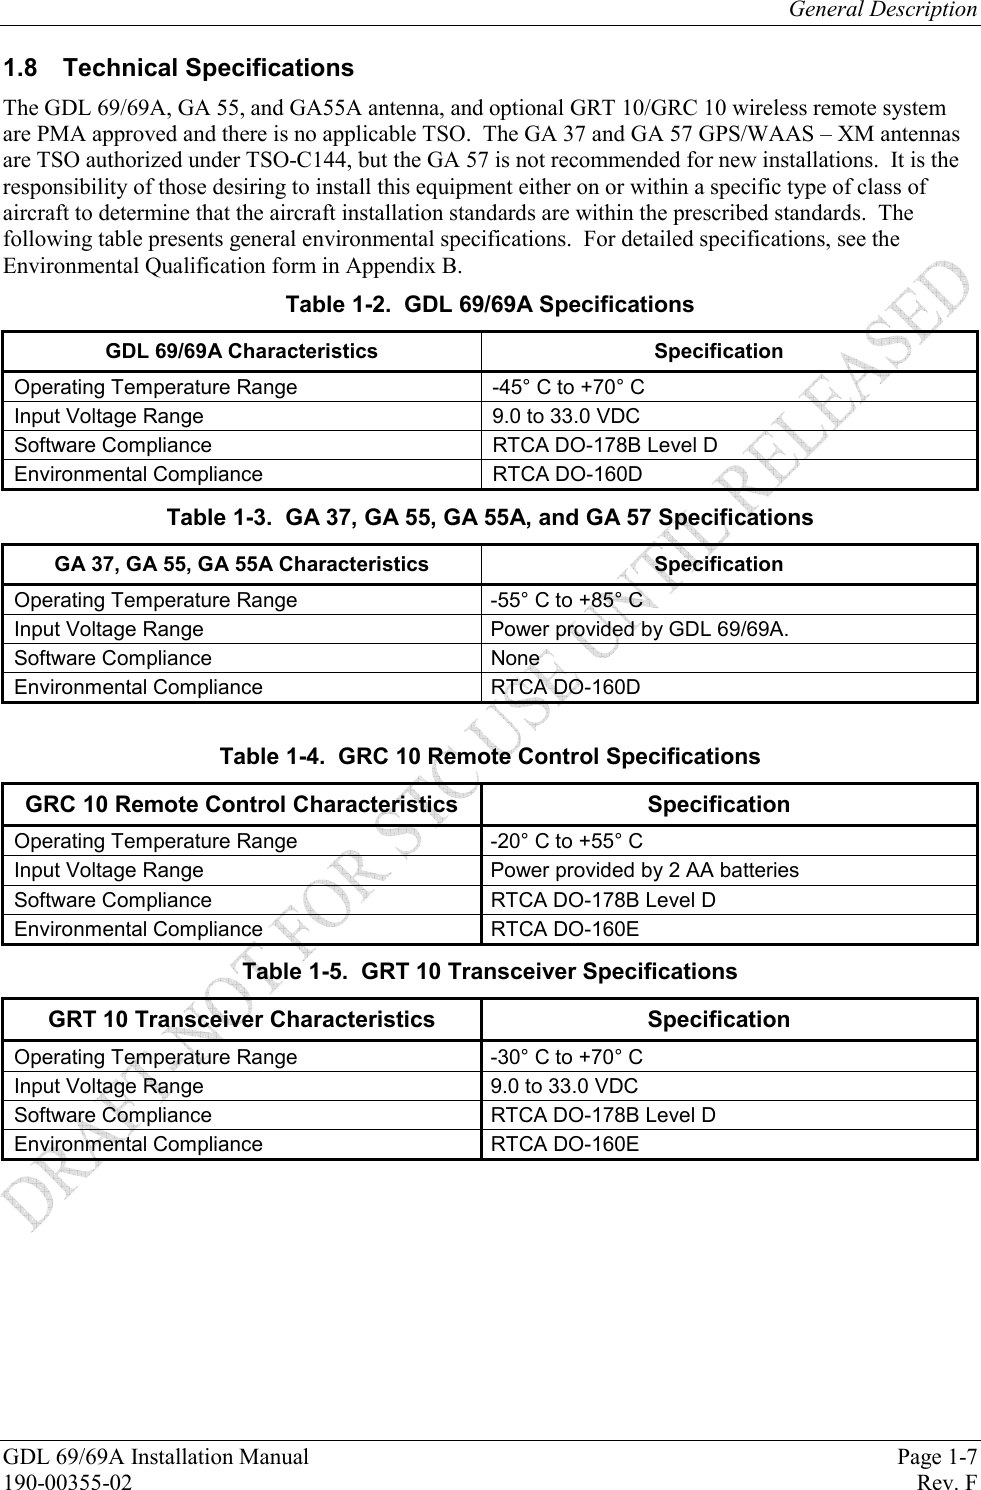 General Description GDL 69/69A Installation Manual  Page 1-7 190-00355-02   Rev. F 1.8 Technical Specifications The GDL 69/69A, GA 55, and GA55A antenna, and optional GRT 10/GRC 10 wireless remote system are PMA approved and there is no applicable TSO.  The GA 37 and GA 57 GPS/WAAS – XM antennas are TSO authorized under TSO-C144, but the GA 57 is not recommended for new installations.  It is the responsibility of those desiring to install this equipment either on or within a specific type of class of aircraft to determine that the aircraft installation standards are within the prescribed standards.  The following table presents general environmental specifications.  For detailed specifications, see the Environmental Qualification form in Appendix B. Table 1-2.  GDL 69/69A Specifications GDL 69/69A Characteristics  Specification Operating Temperature Range  -45° C to +70° C Input Voltage Range  9.0 to 33.0 VDC Software Compliance  RTCA DO-178B Level D Environmental Compliance  RTCA DO-160D Table 1-3.  GA 37, GA 55, GA 55A, and GA 57 Specifications GA 37, GA 55, GA 55A Characteristics  Specification Operating Temperature Range  -55° C to +85° C Input Voltage Range  Power provided by GDL 69/69A. Software Compliance  None Environmental Compliance  RTCA DO-160D  Table 1-4.  GRC 10 Remote Control Specifications GRC 10 Remote Control Characteristics  Specification Operating Temperature Range  -20° C to +55° C Input Voltage Range  Power provided by 2 AA batteries Software Compliance  RTCA DO-178B Level D Environmental Compliance  RTCA DO-160E Table 1-5.  GRT 10 Transceiver Specifications GRT 10 Transceiver Characteristics  Specification Operating Temperature Range  -30° C to +70° C Input Voltage Range  9.0 to 33.0 VDC Software Compliance  RTCA DO-178B Level D Environmental Compliance  RTCA DO-160E  